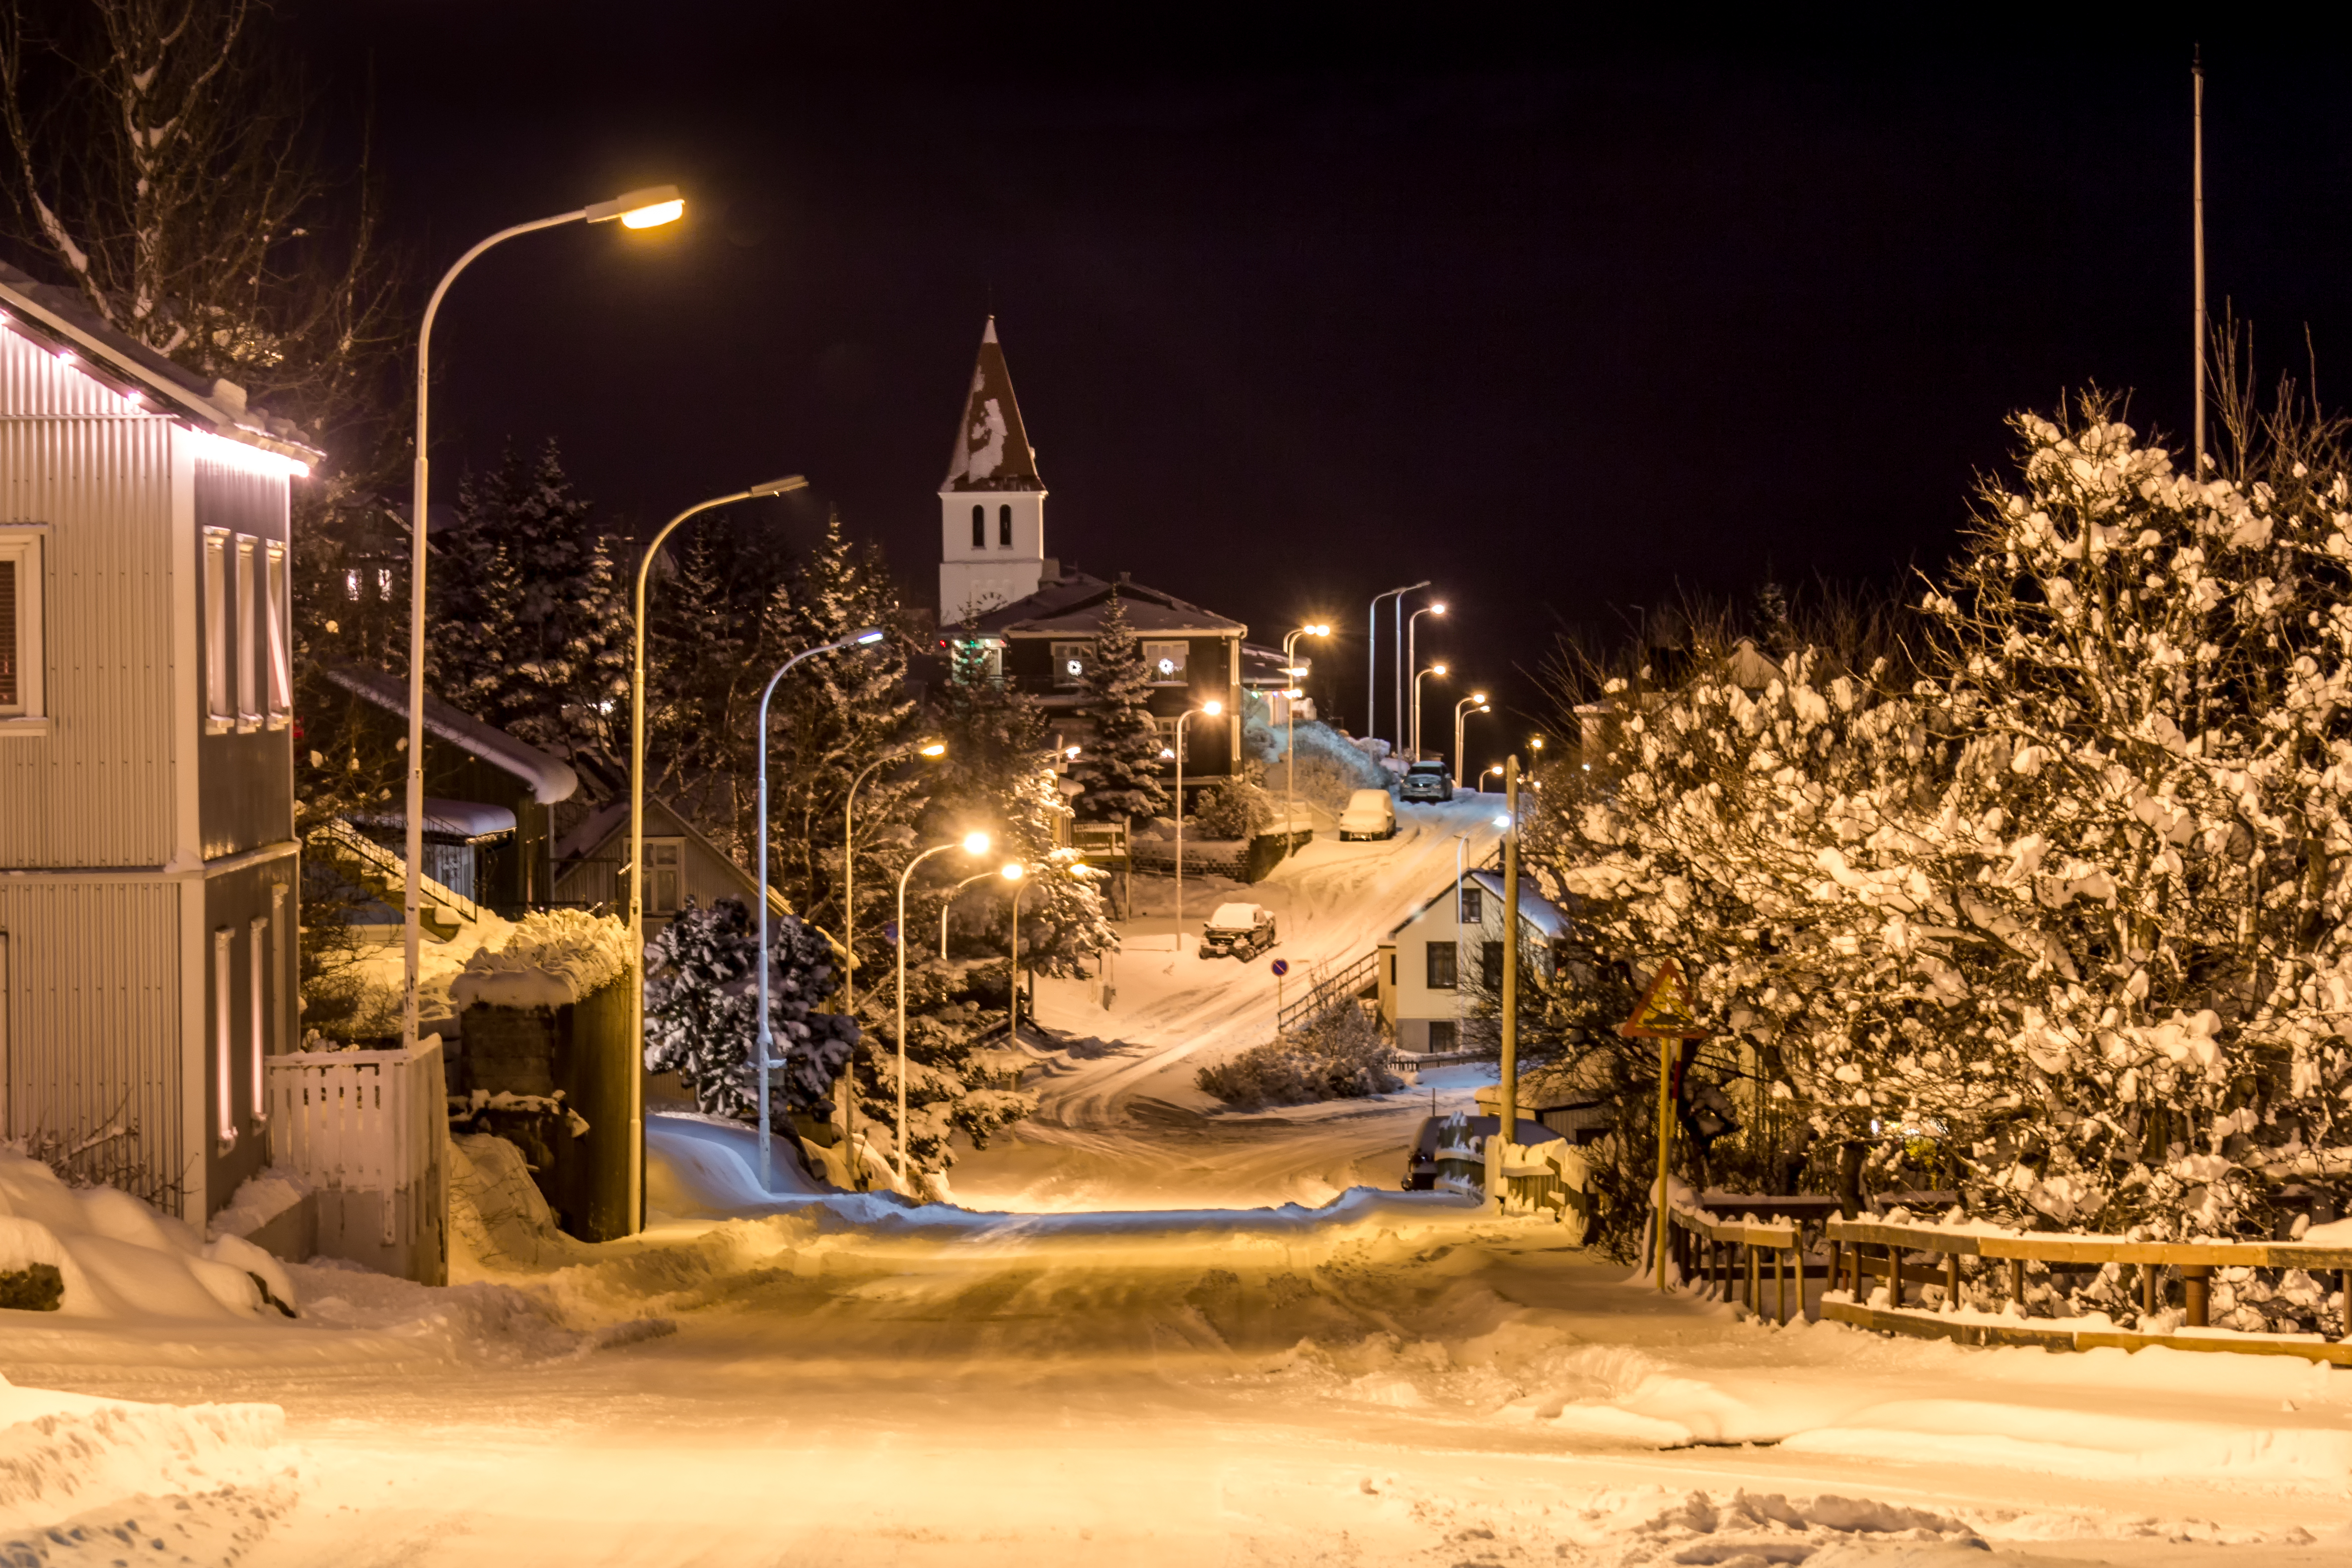 The town of Sigló covered in snow